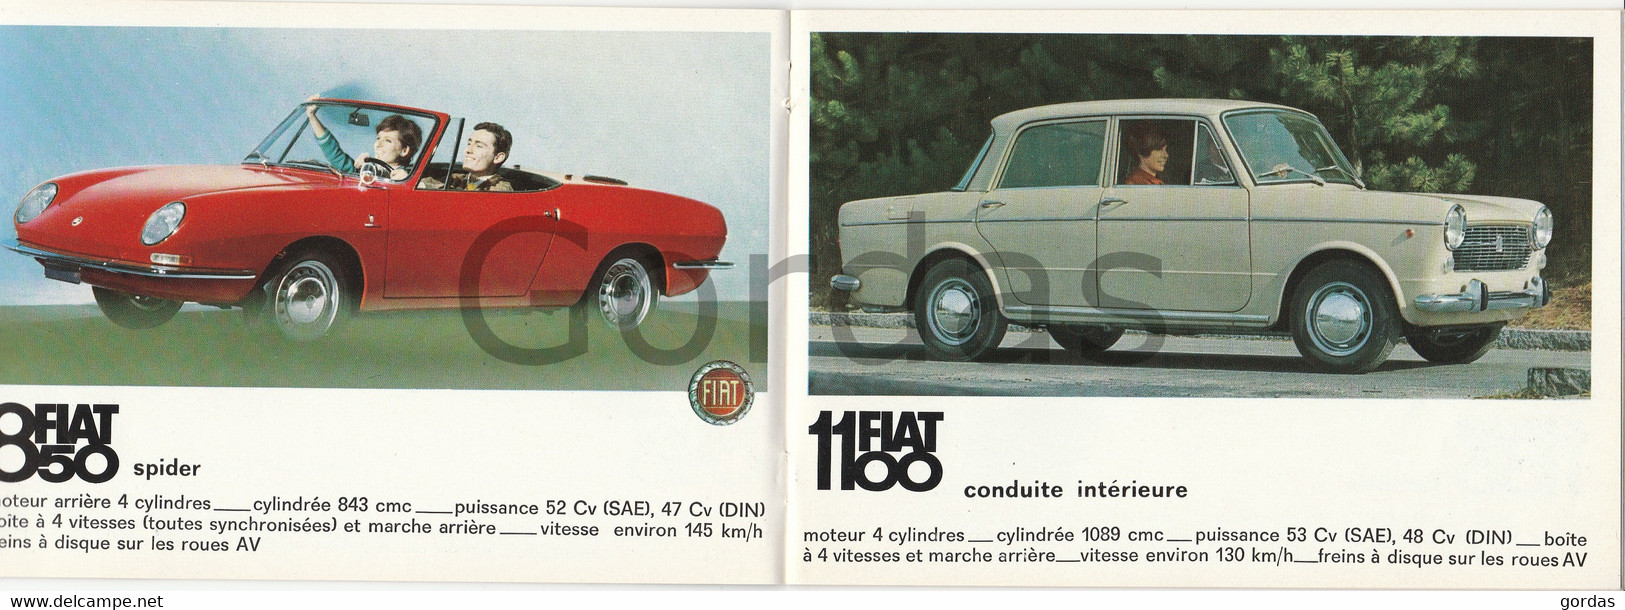 Italy - Fiat - Old Time Car Advertise Brochure - 22 Photos - 150x100mm - Trasporti